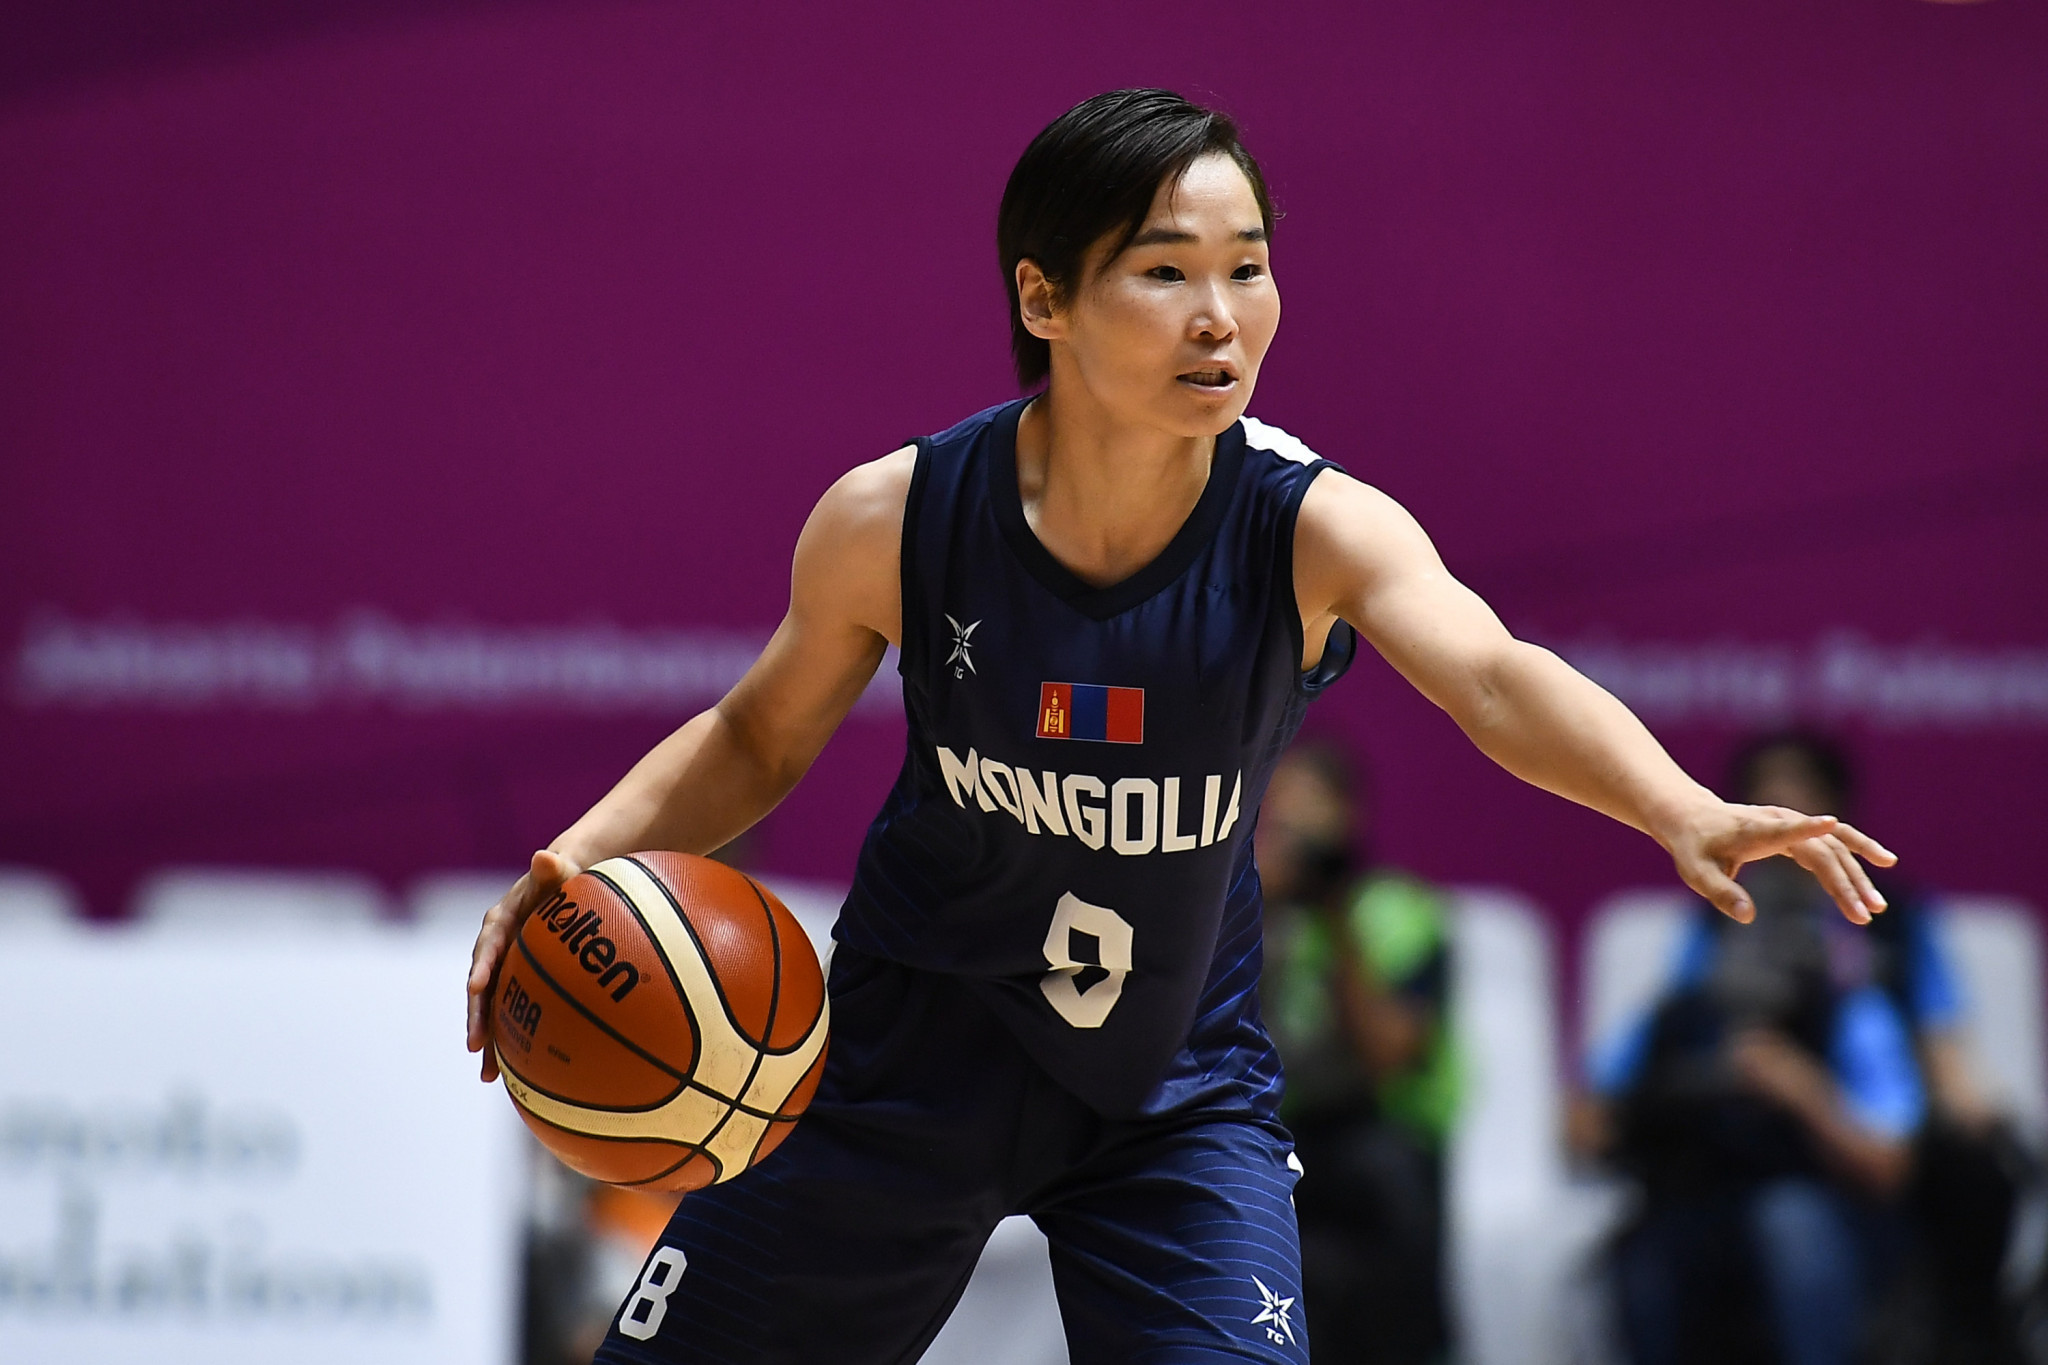 Mongolia's women's 3x3 basketball team has qualified for the Tokyo 2020 Olympic Games ©Getty Images